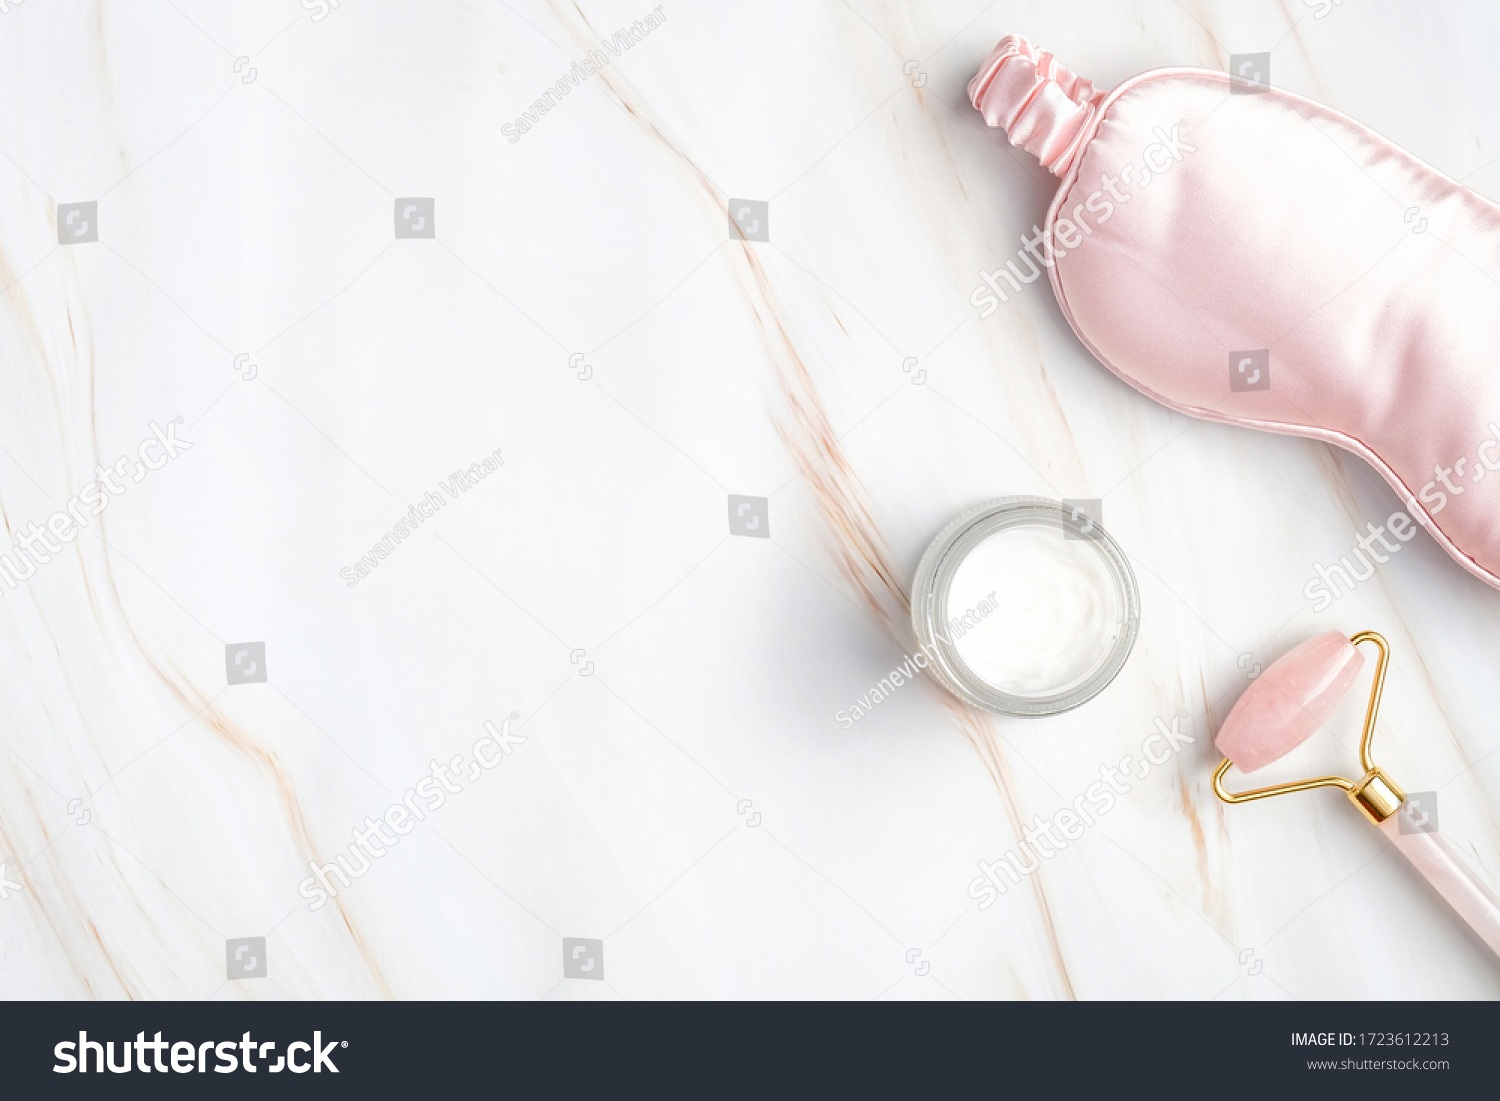 Night care cream for face, sleeping eye mask, facial massage roller on marble background. nighttime skincare routine concept. #1723612213